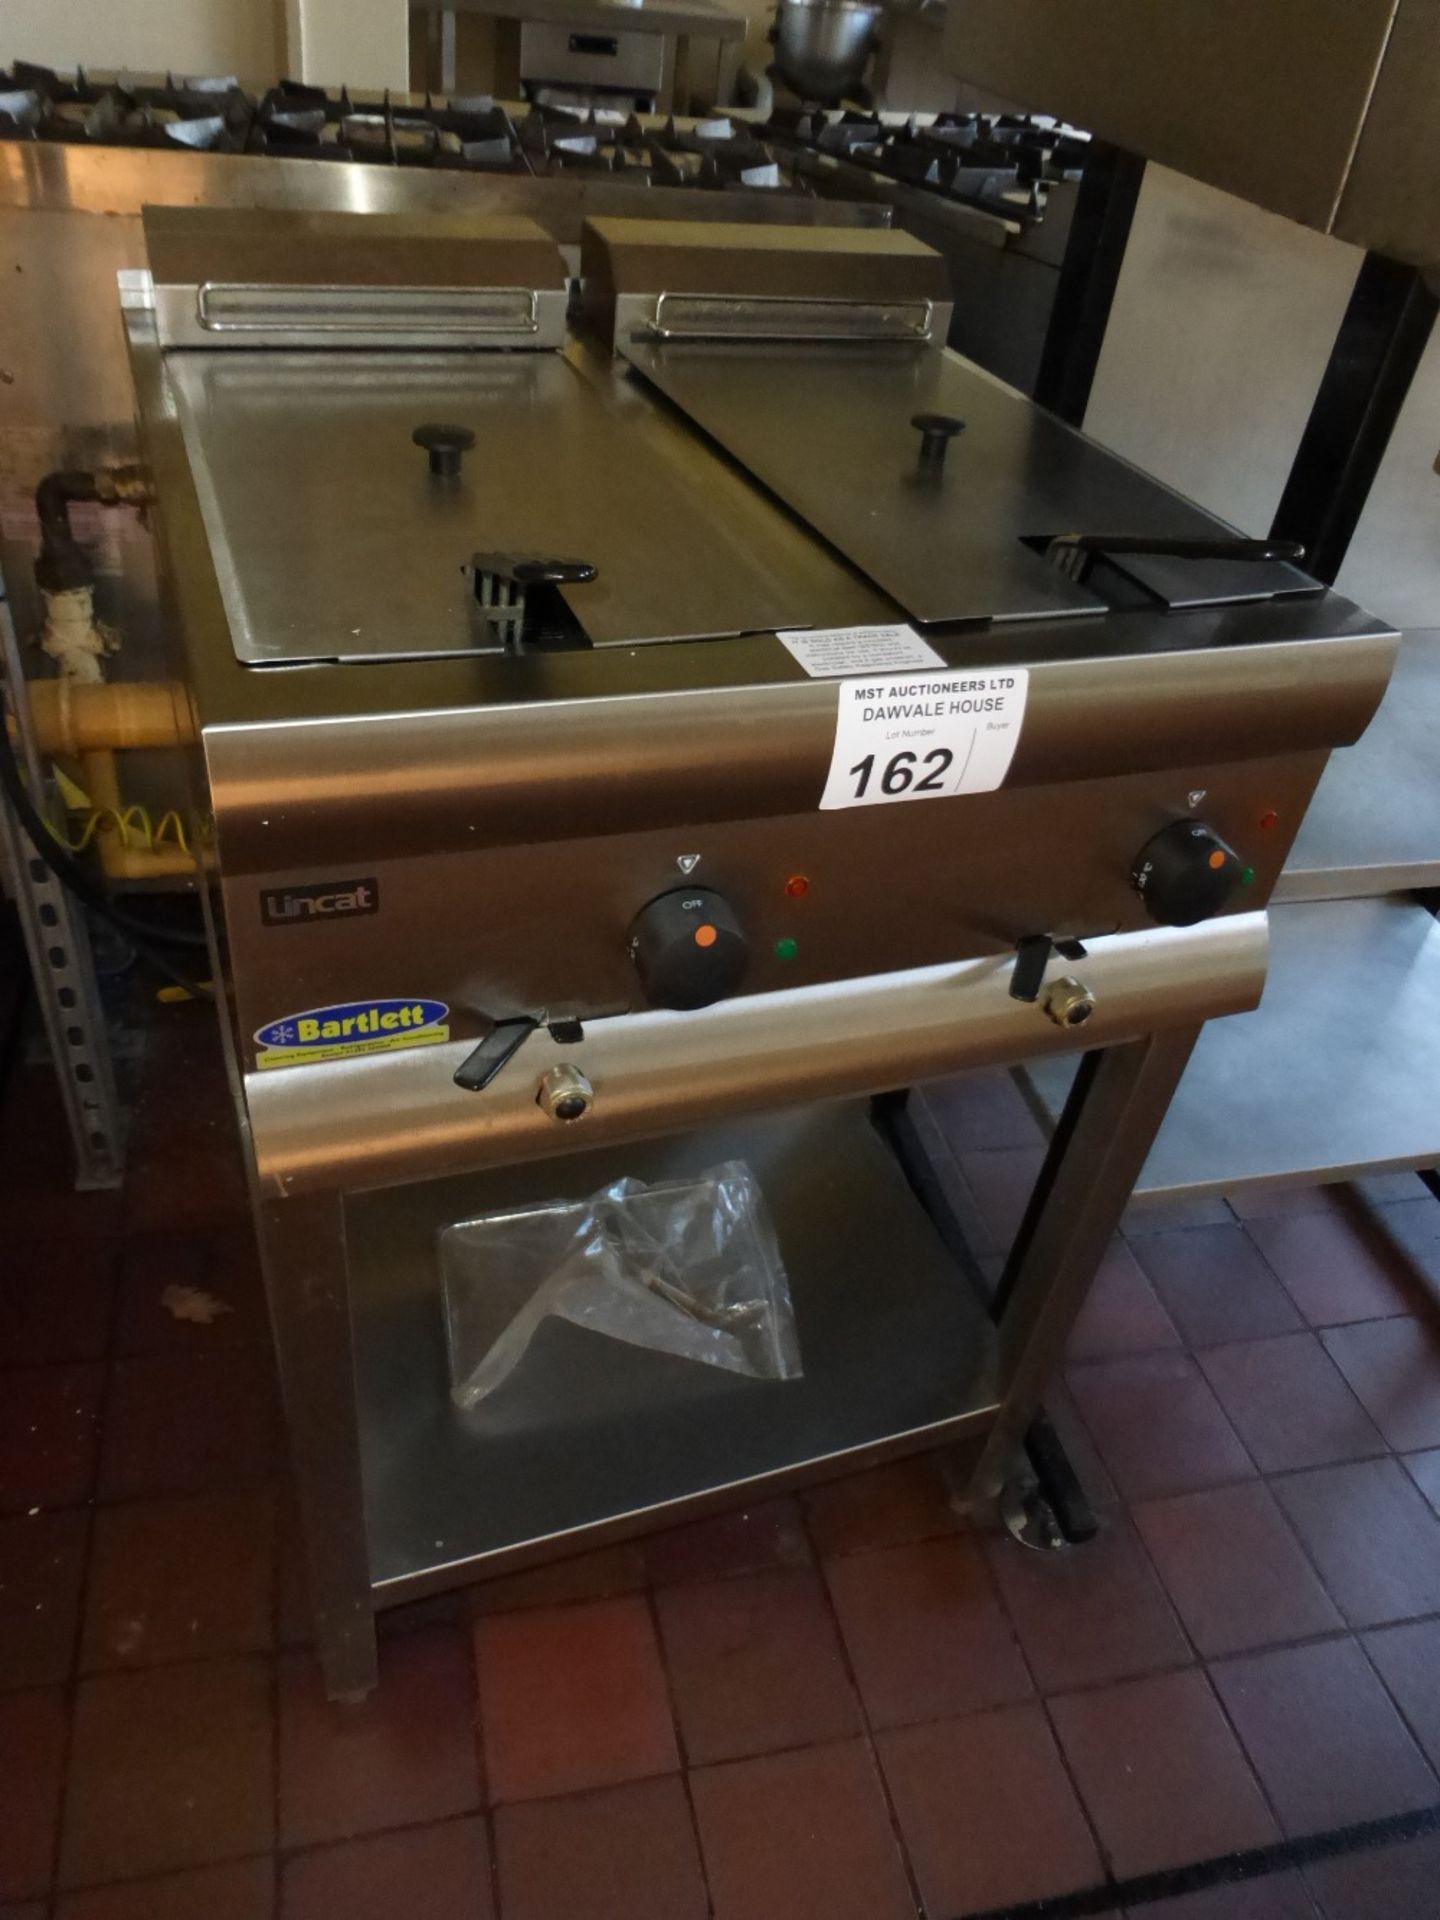 1 Lincat commercial stainless steel double deep fat fryer s/n:21305992 (located in kitchen area)